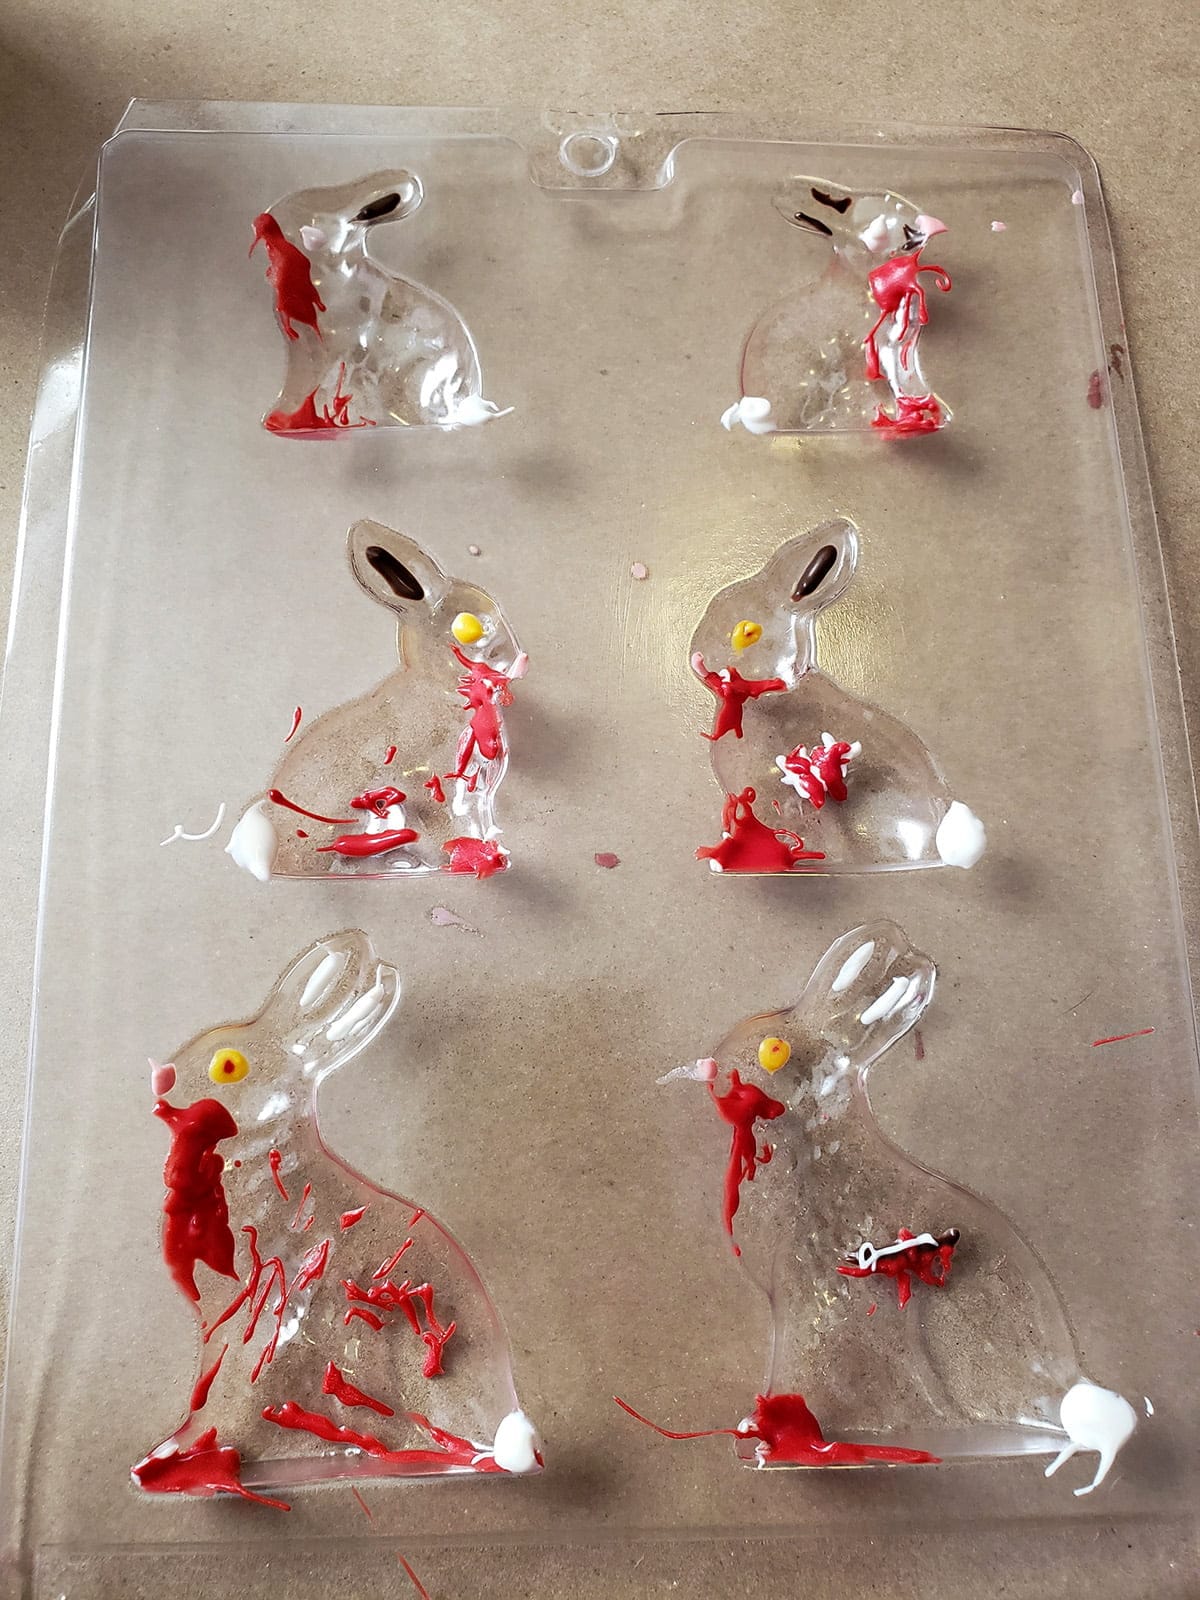 A plastic bunny mold with some of the designs filled in with brightly coloured melted candy.